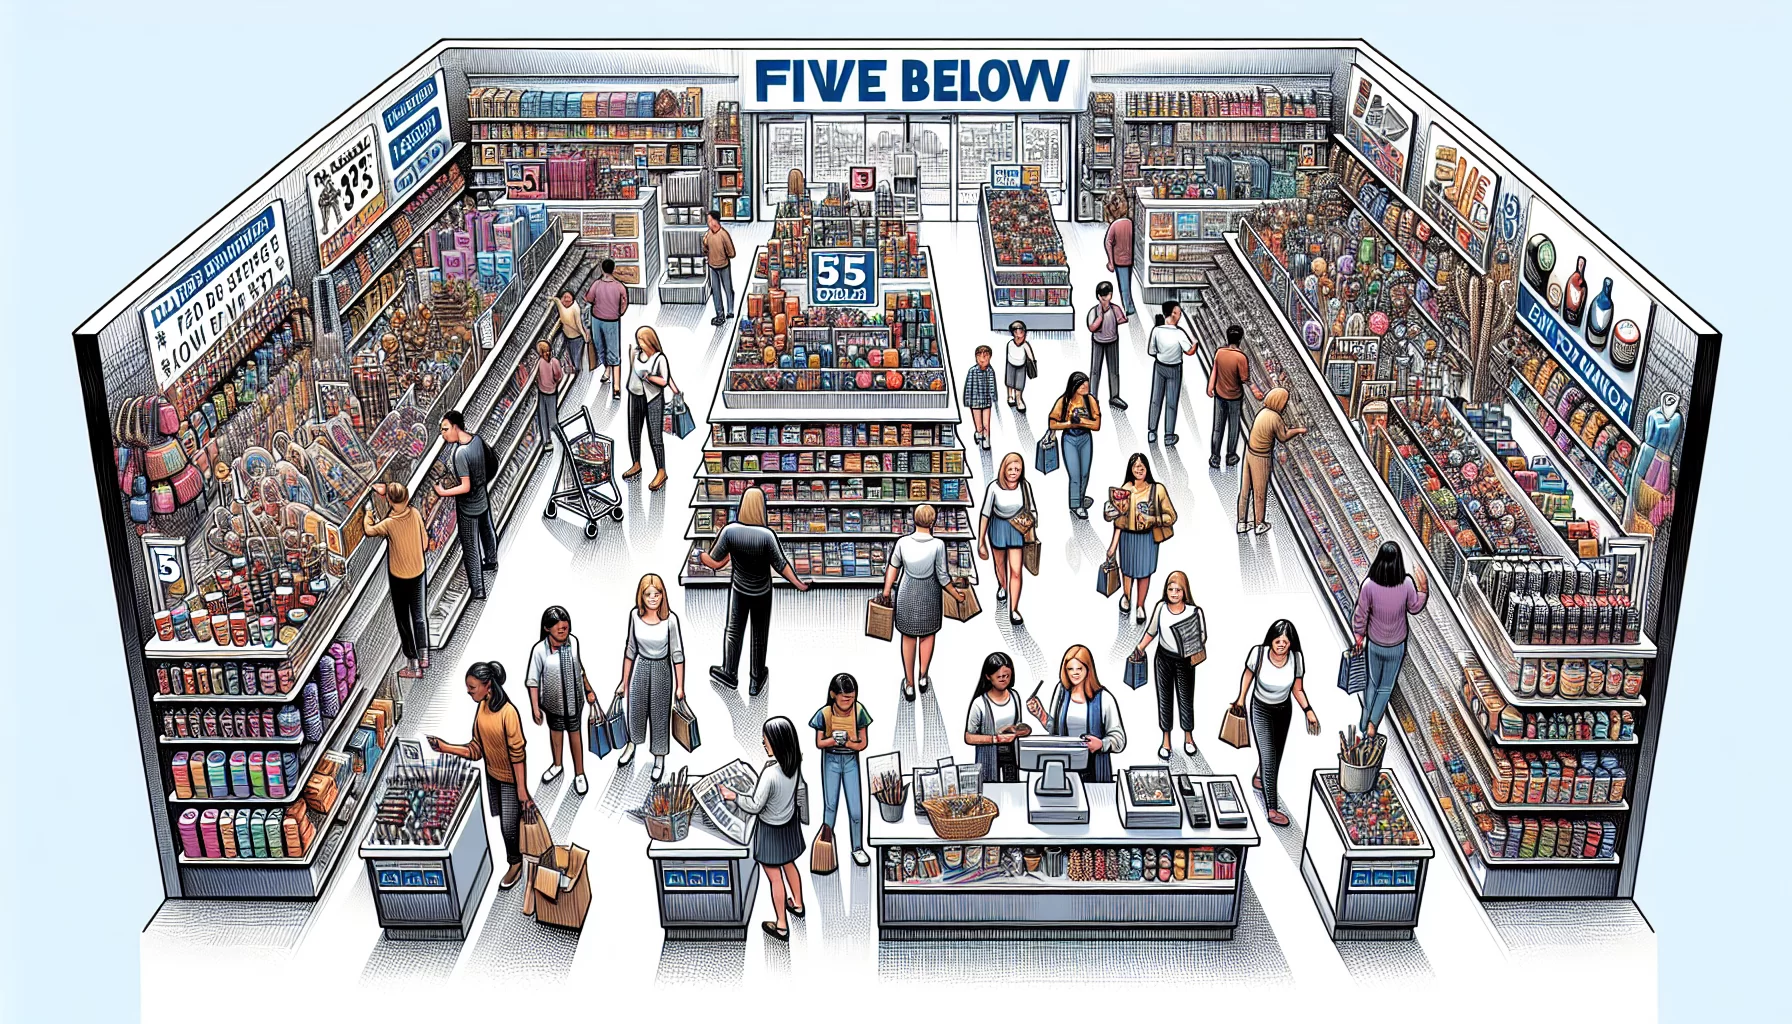 Struggles of low-end consumers: Five Below's strategic response to economic challenges